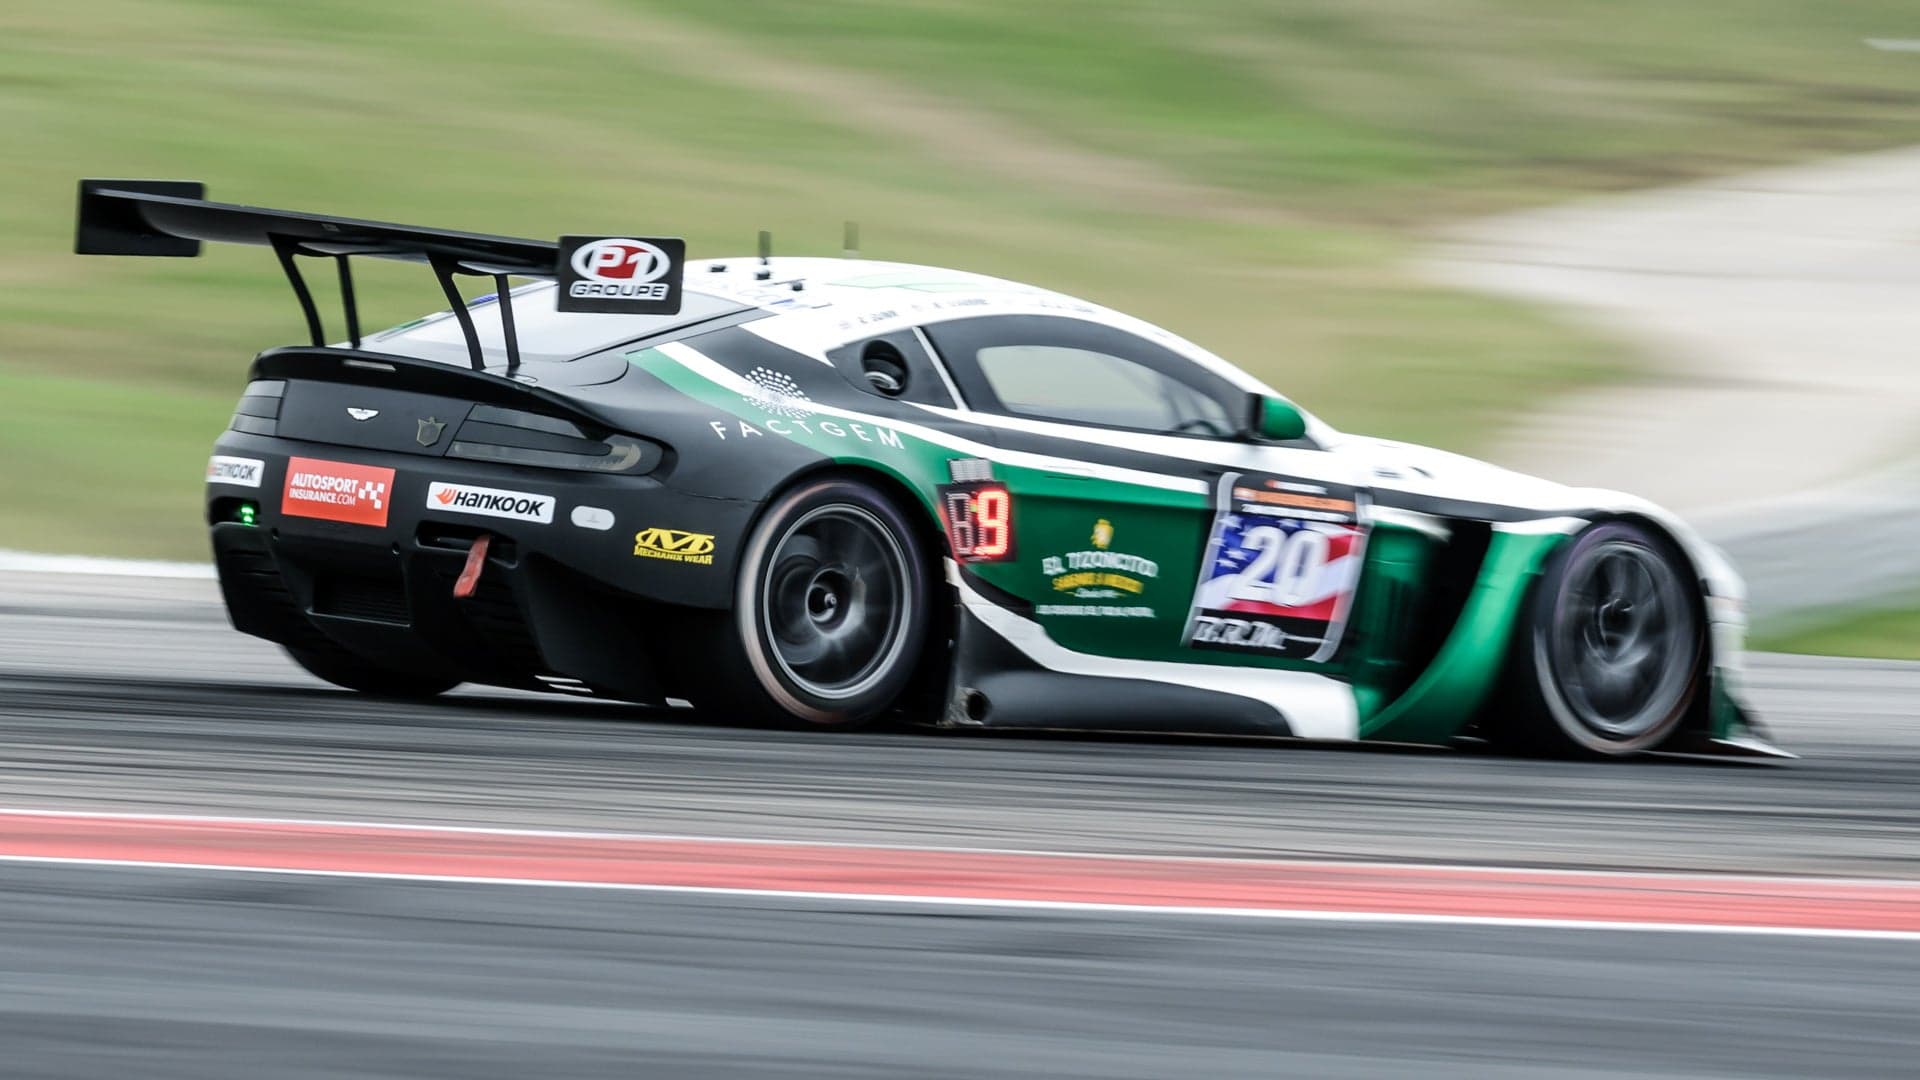 24h Series At COTA Part 1: Qualifying And Day 1